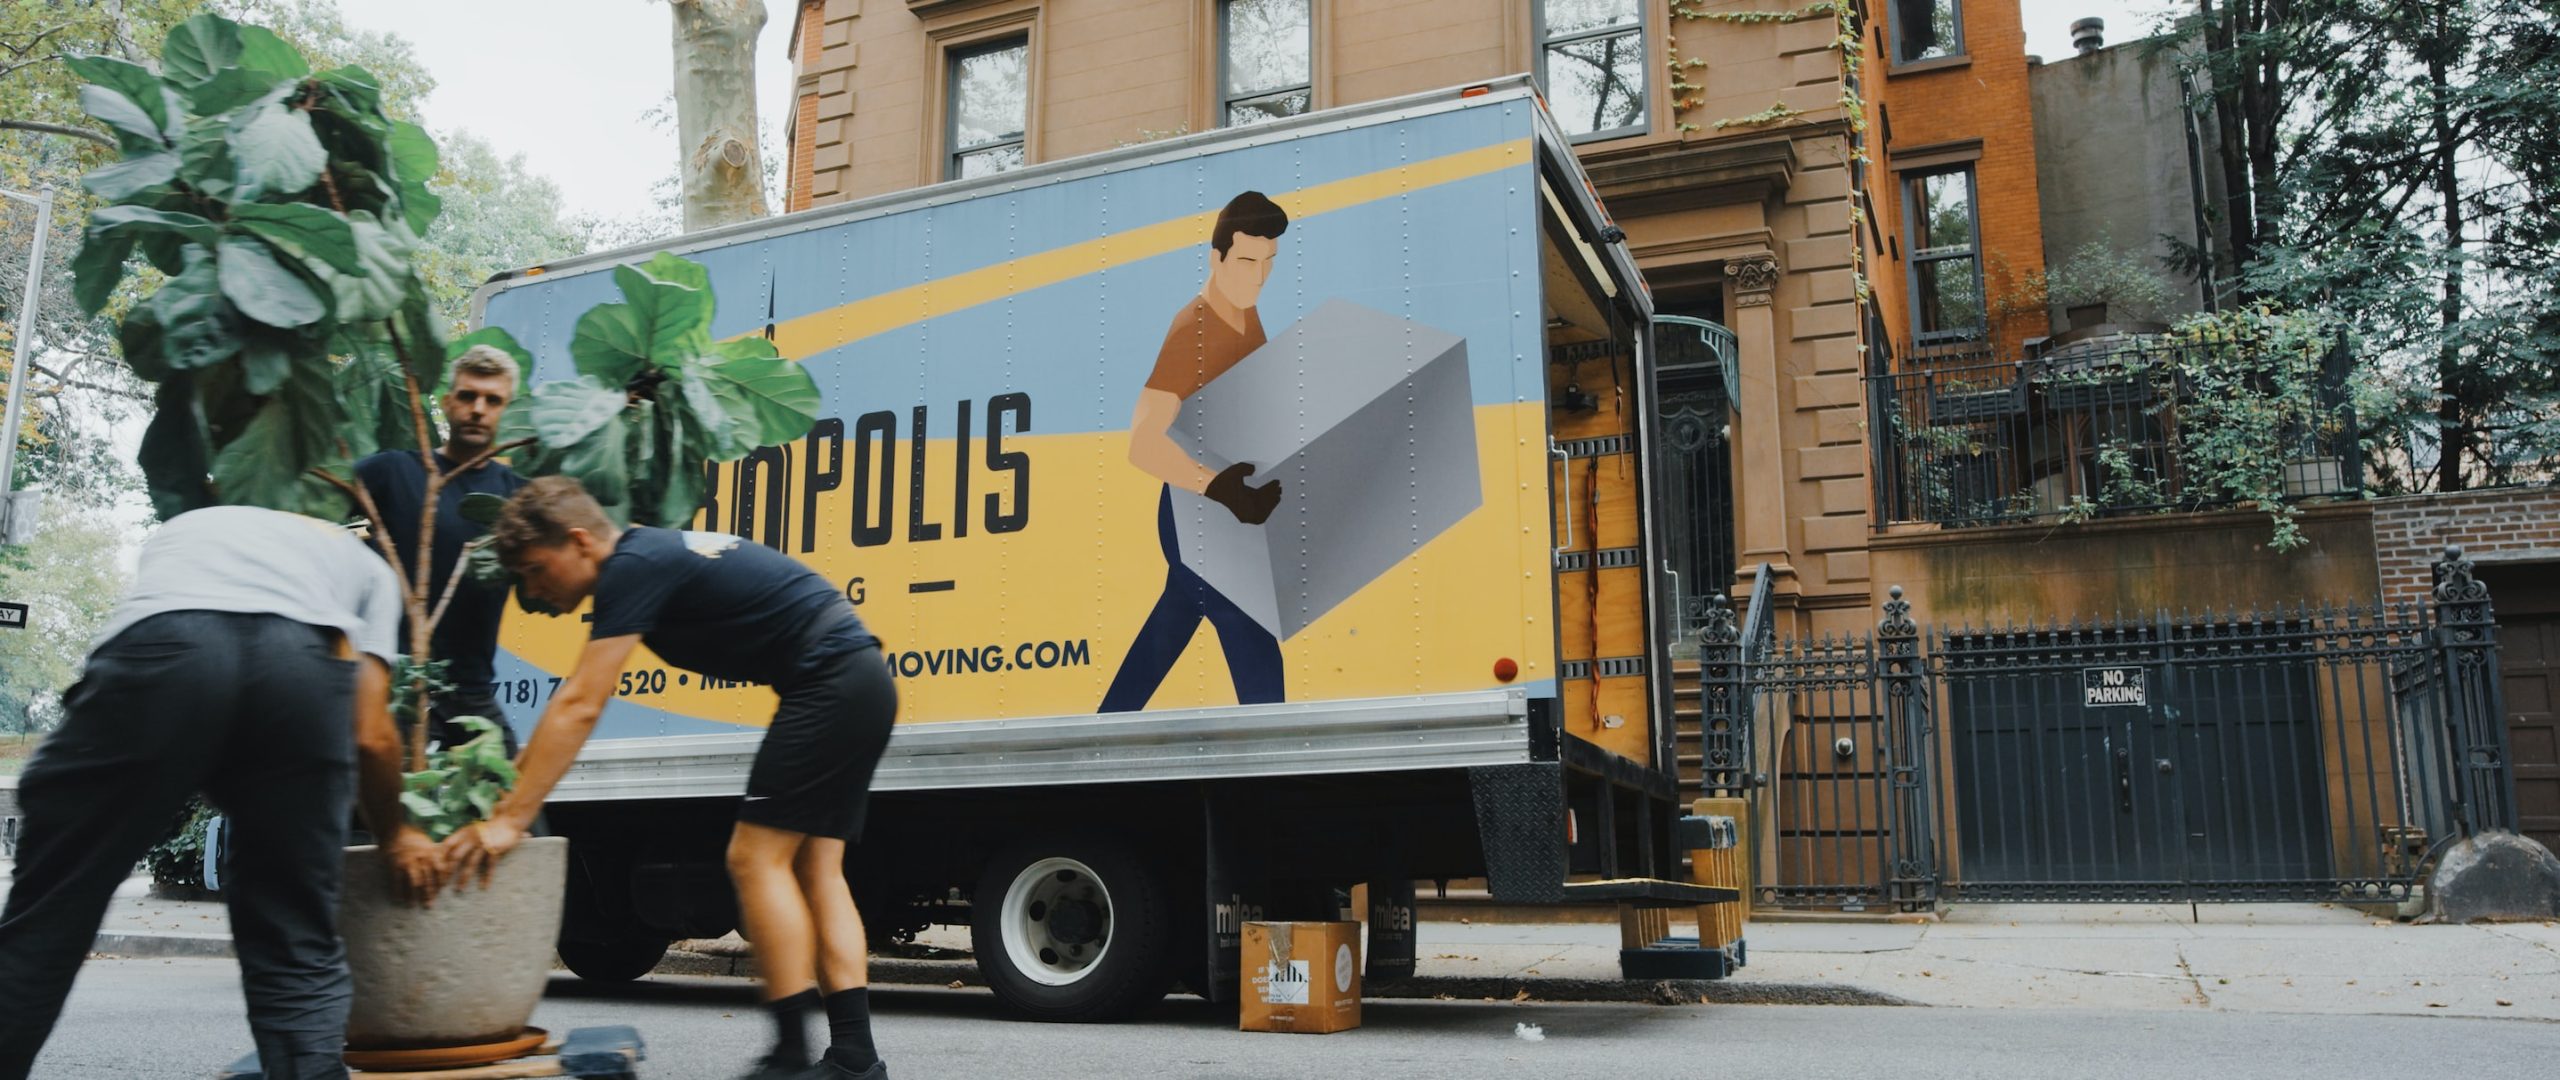 Benefits of Picking a Reputable Moving Company - security, savings, safety, reliability, moving, company, accountability